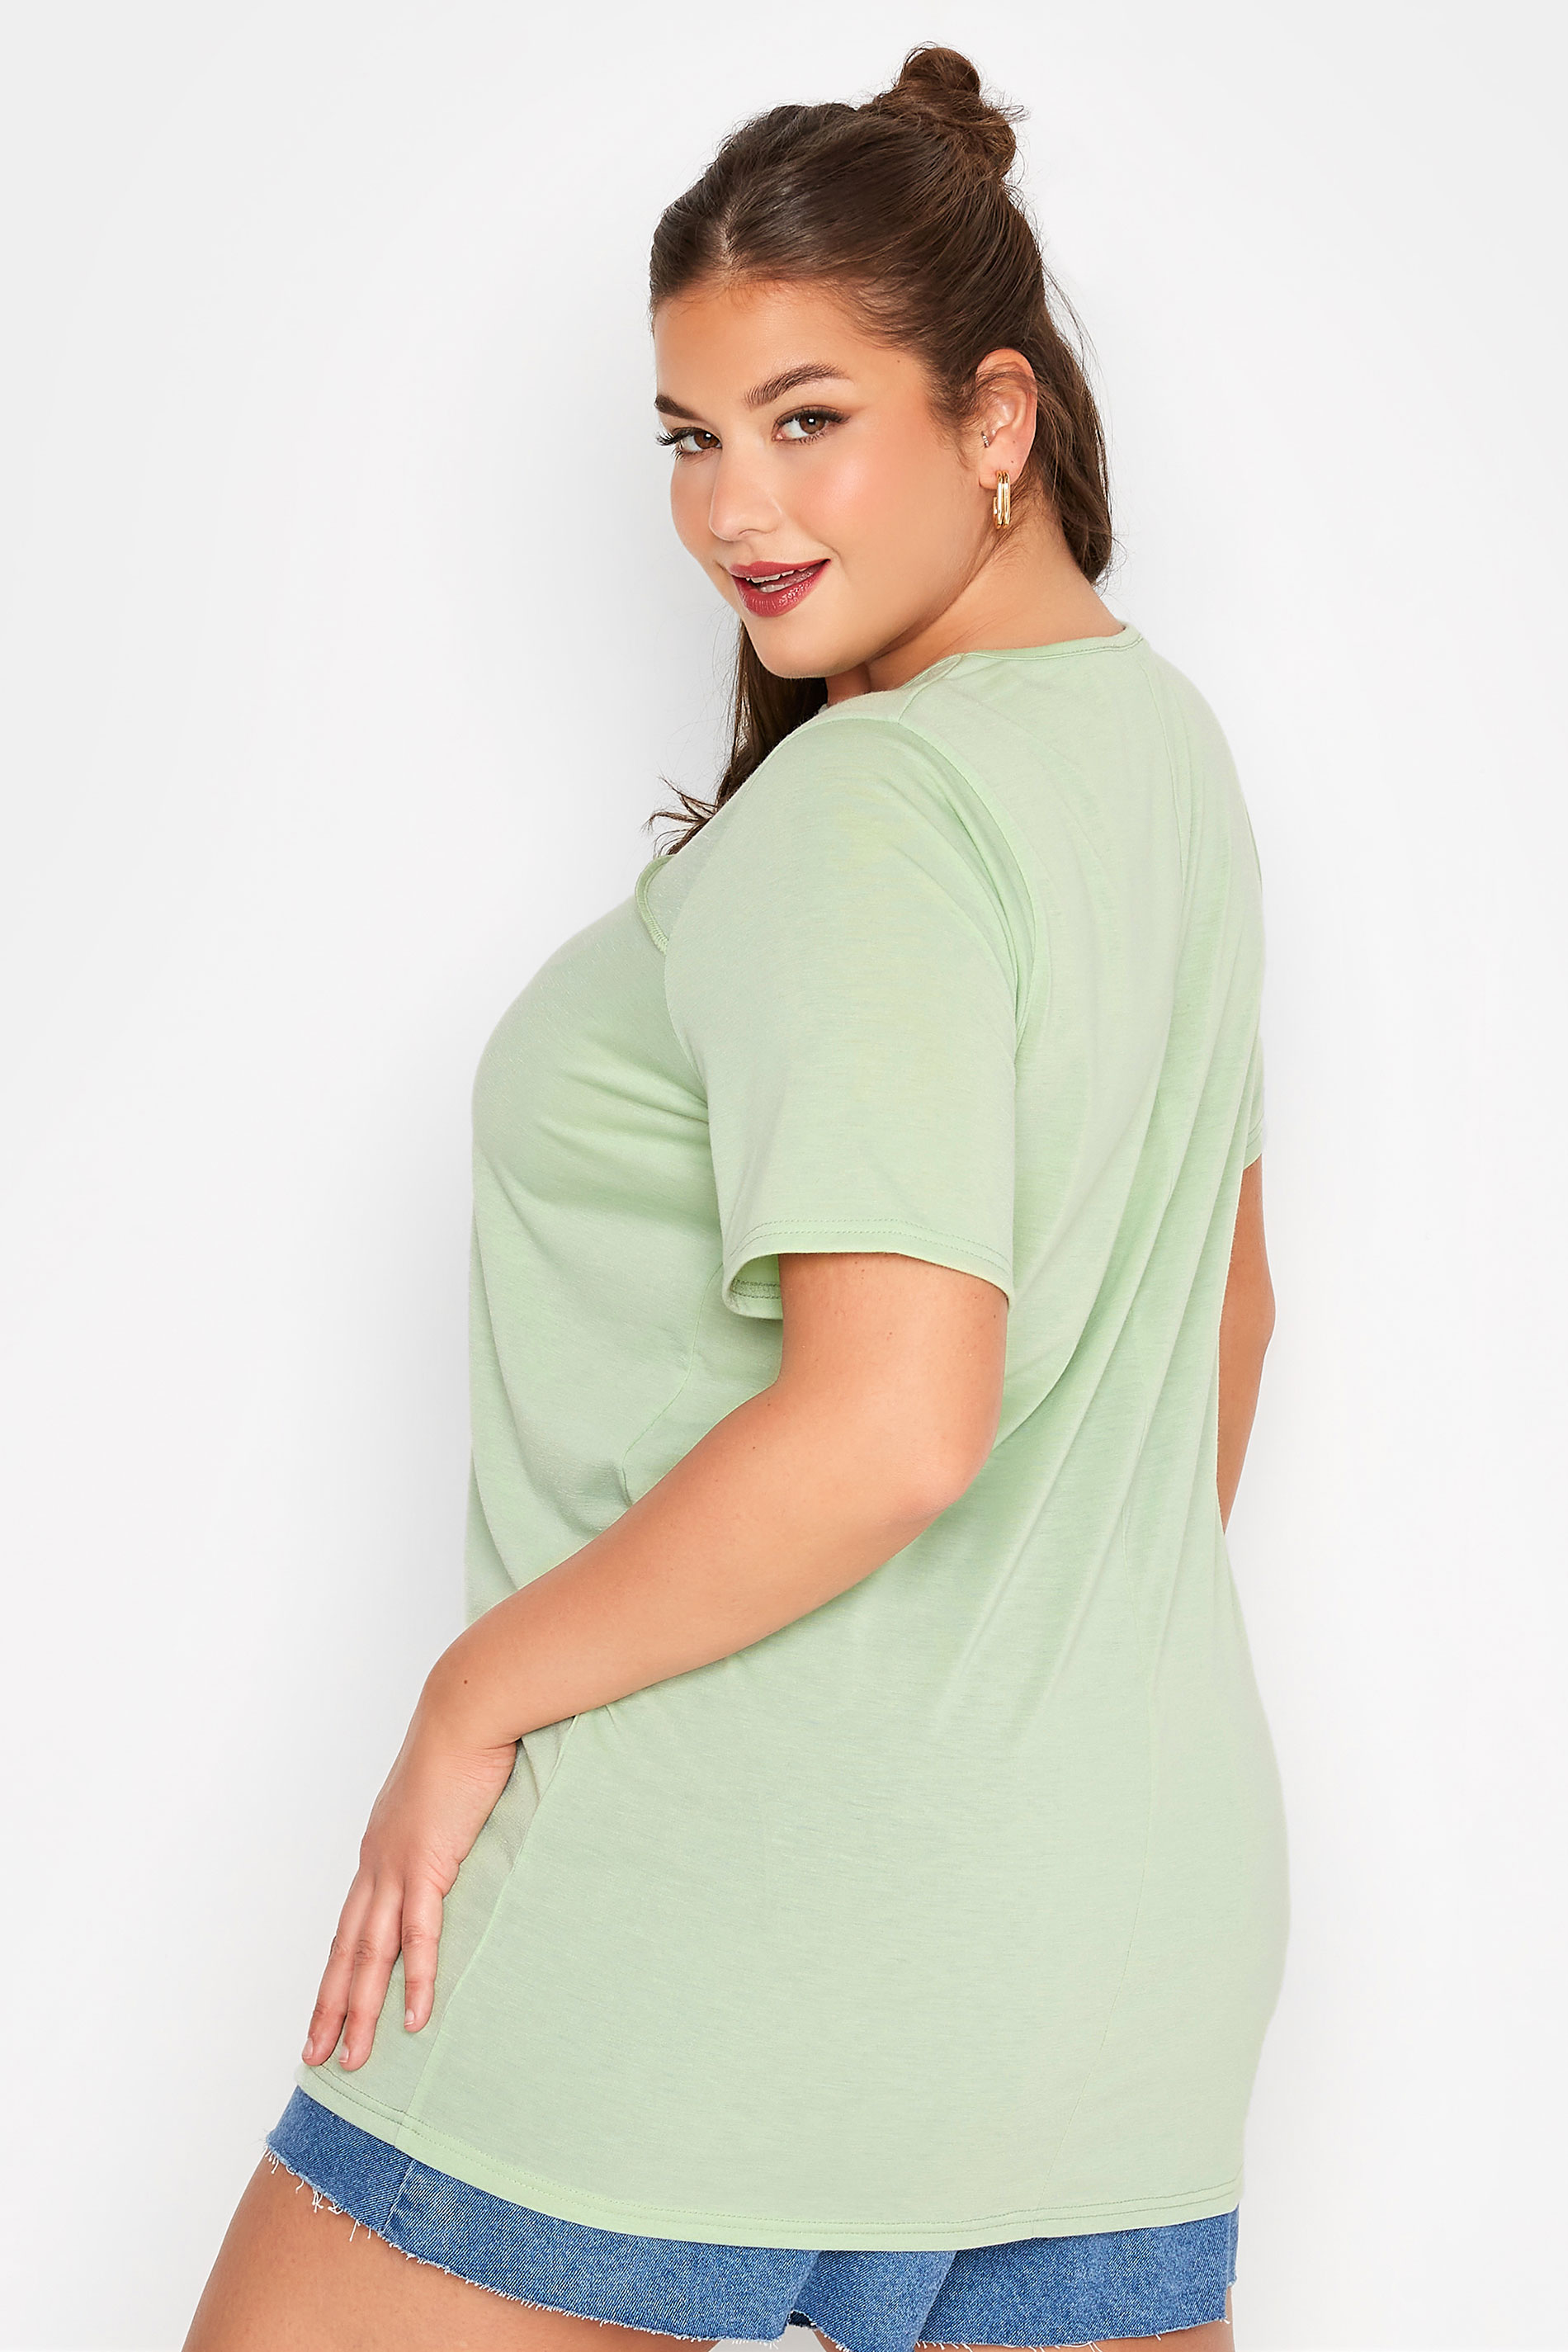 Grande taille  Tops Grande taille  T-Shirts | LIMITED COLLECTION - T-Shirt Vert Pastel Couture en Jersey - RK62290